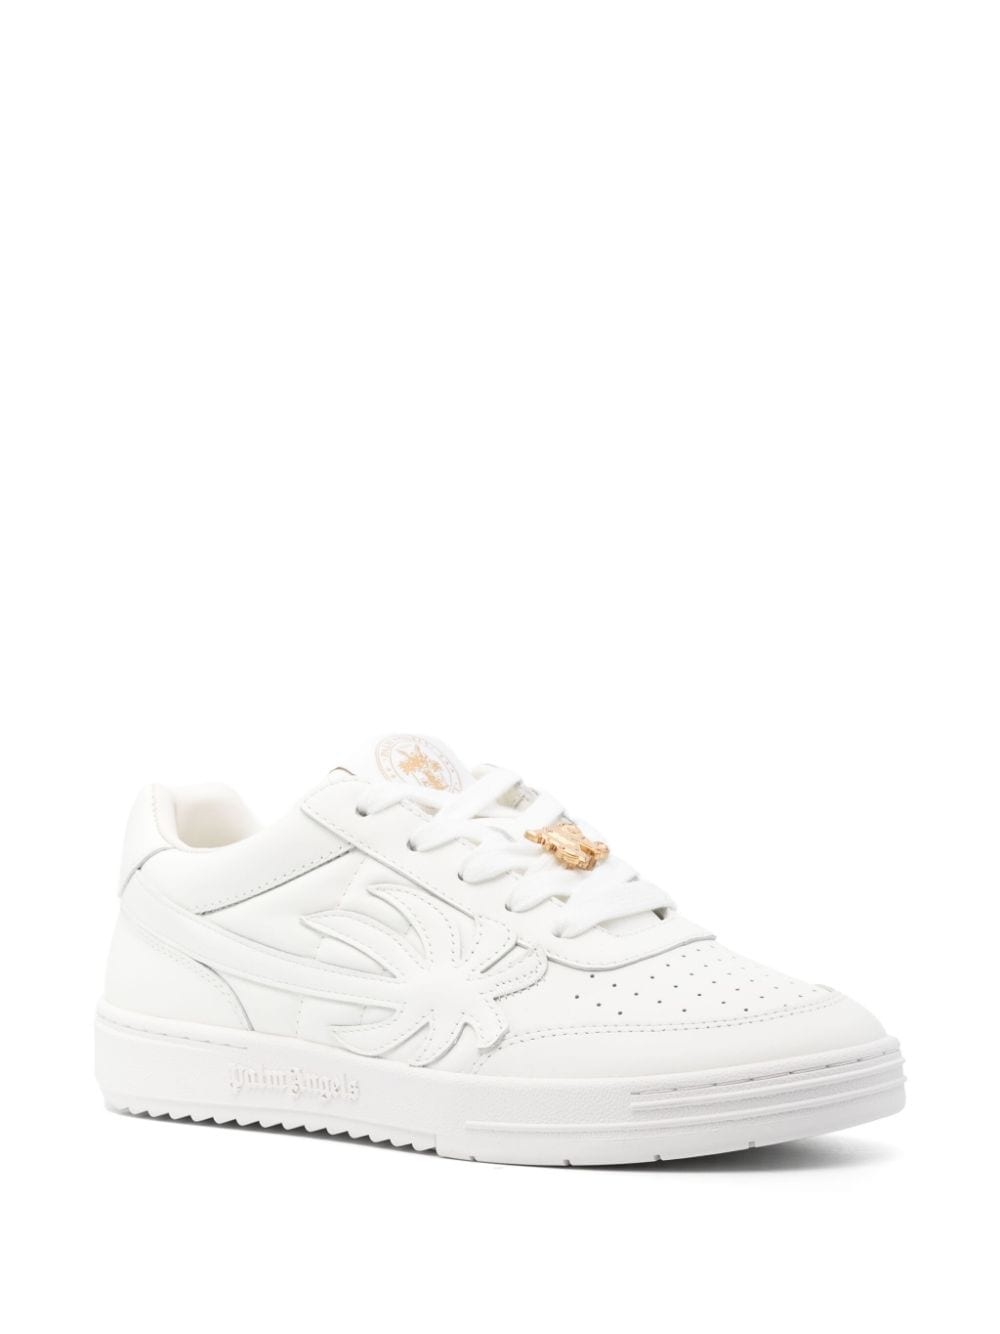 Palm Beach University leather sneakers - 2